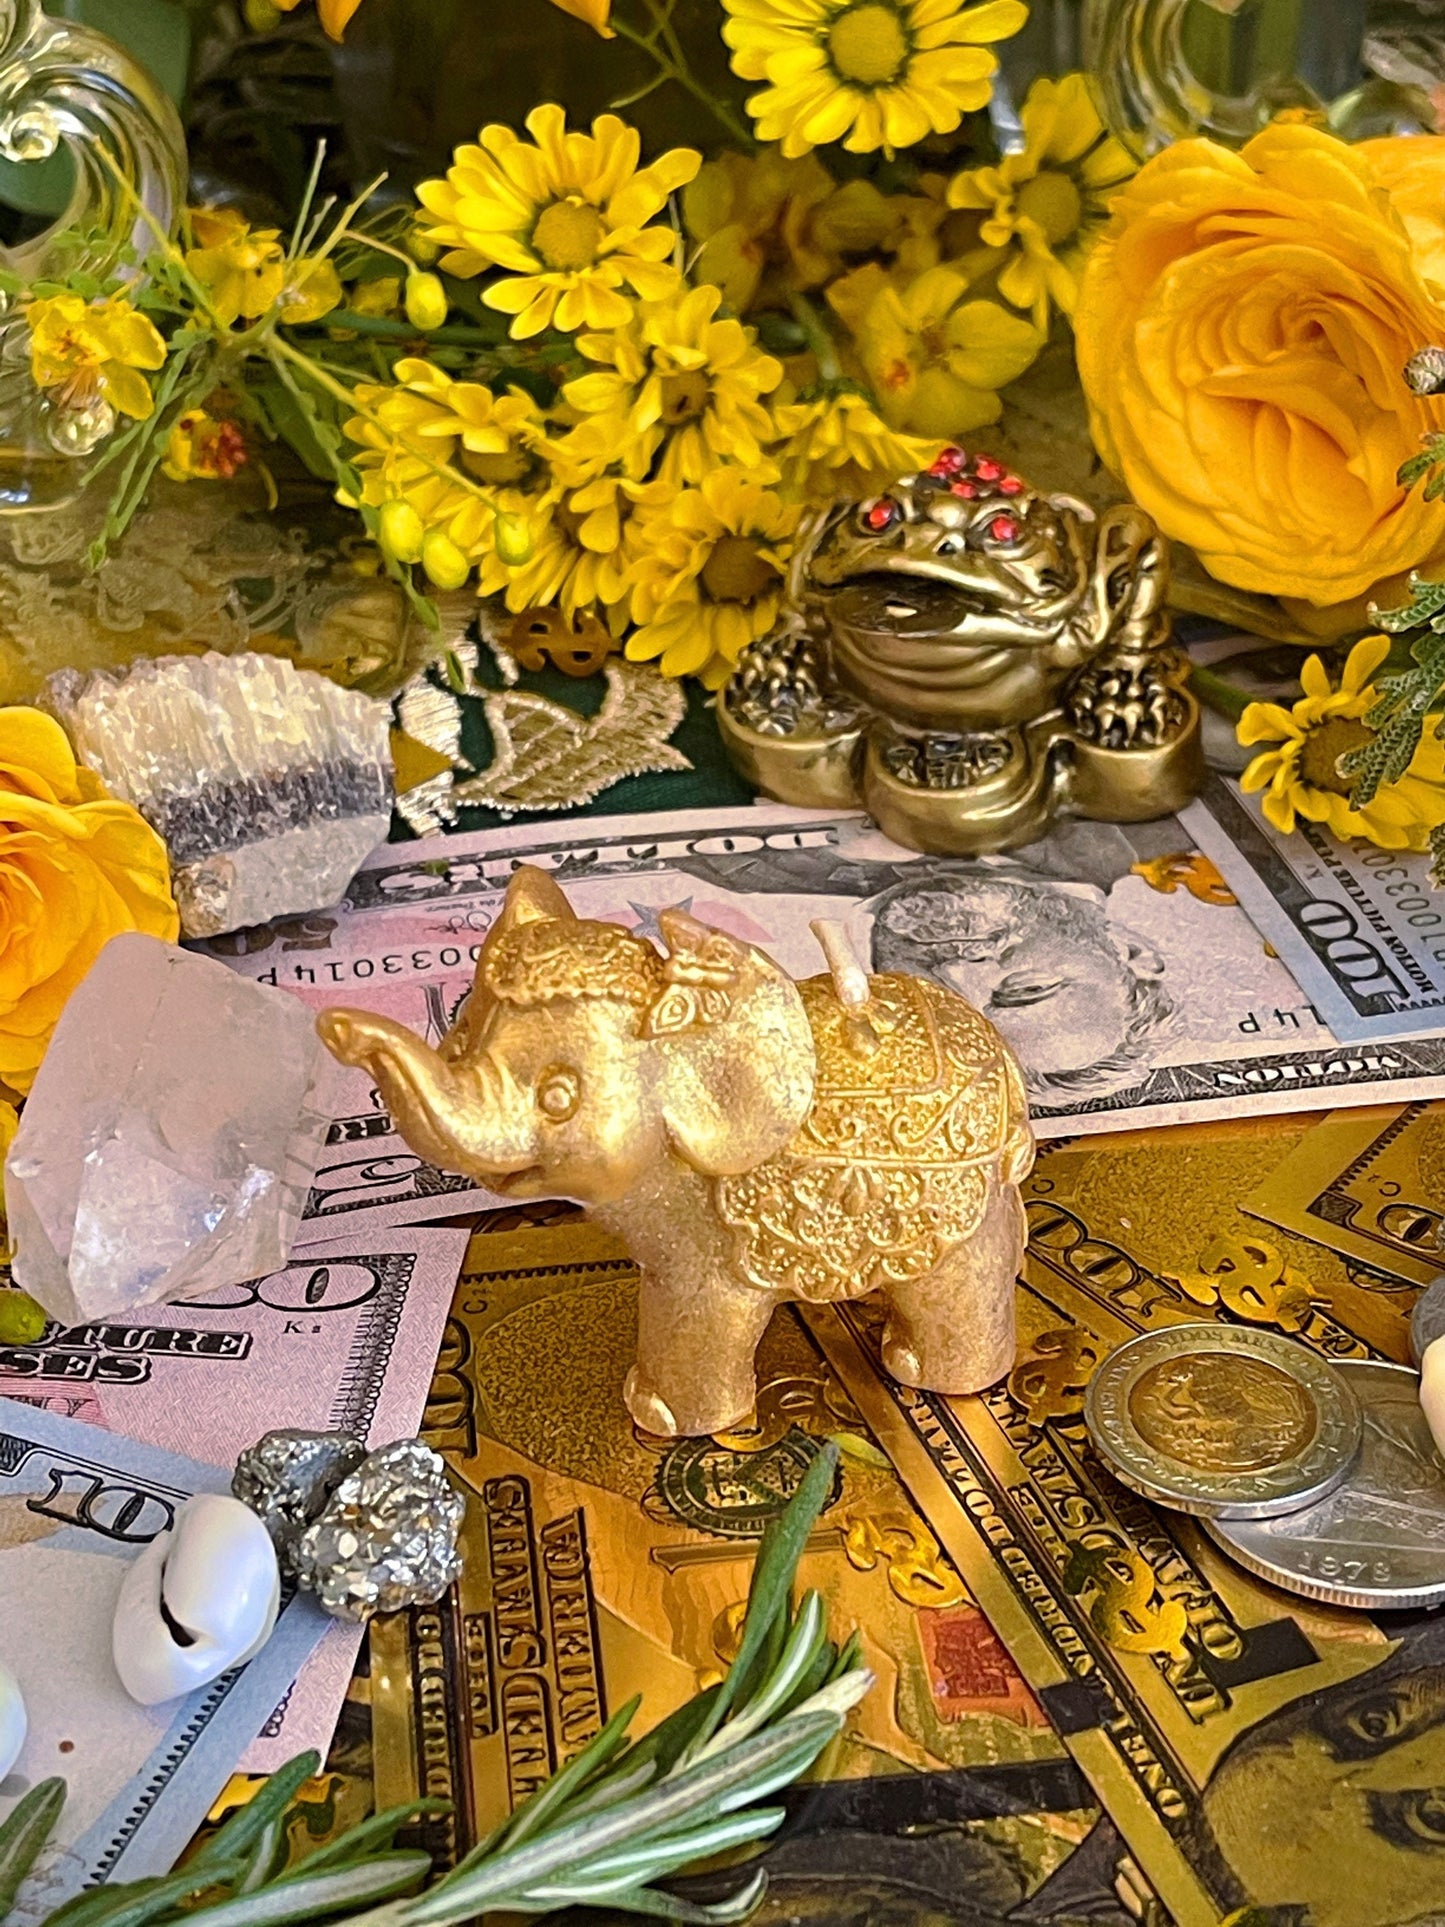 Elephant Candle + Luck + Spirit Guides